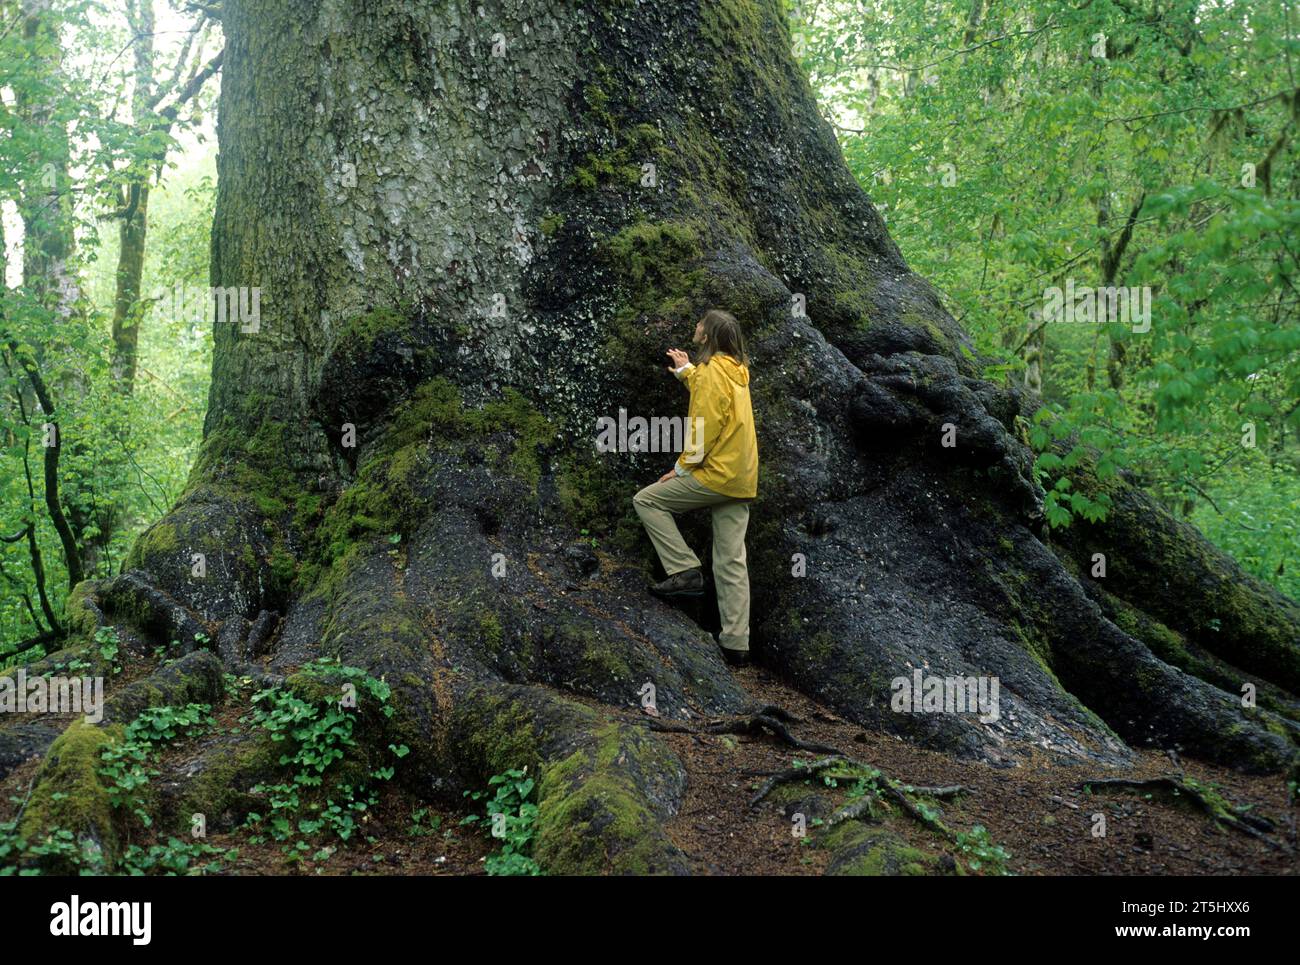 Worlds largest Sitka spruce (Picea sitchensis), Quinault River Valley, Washington Stock Photo